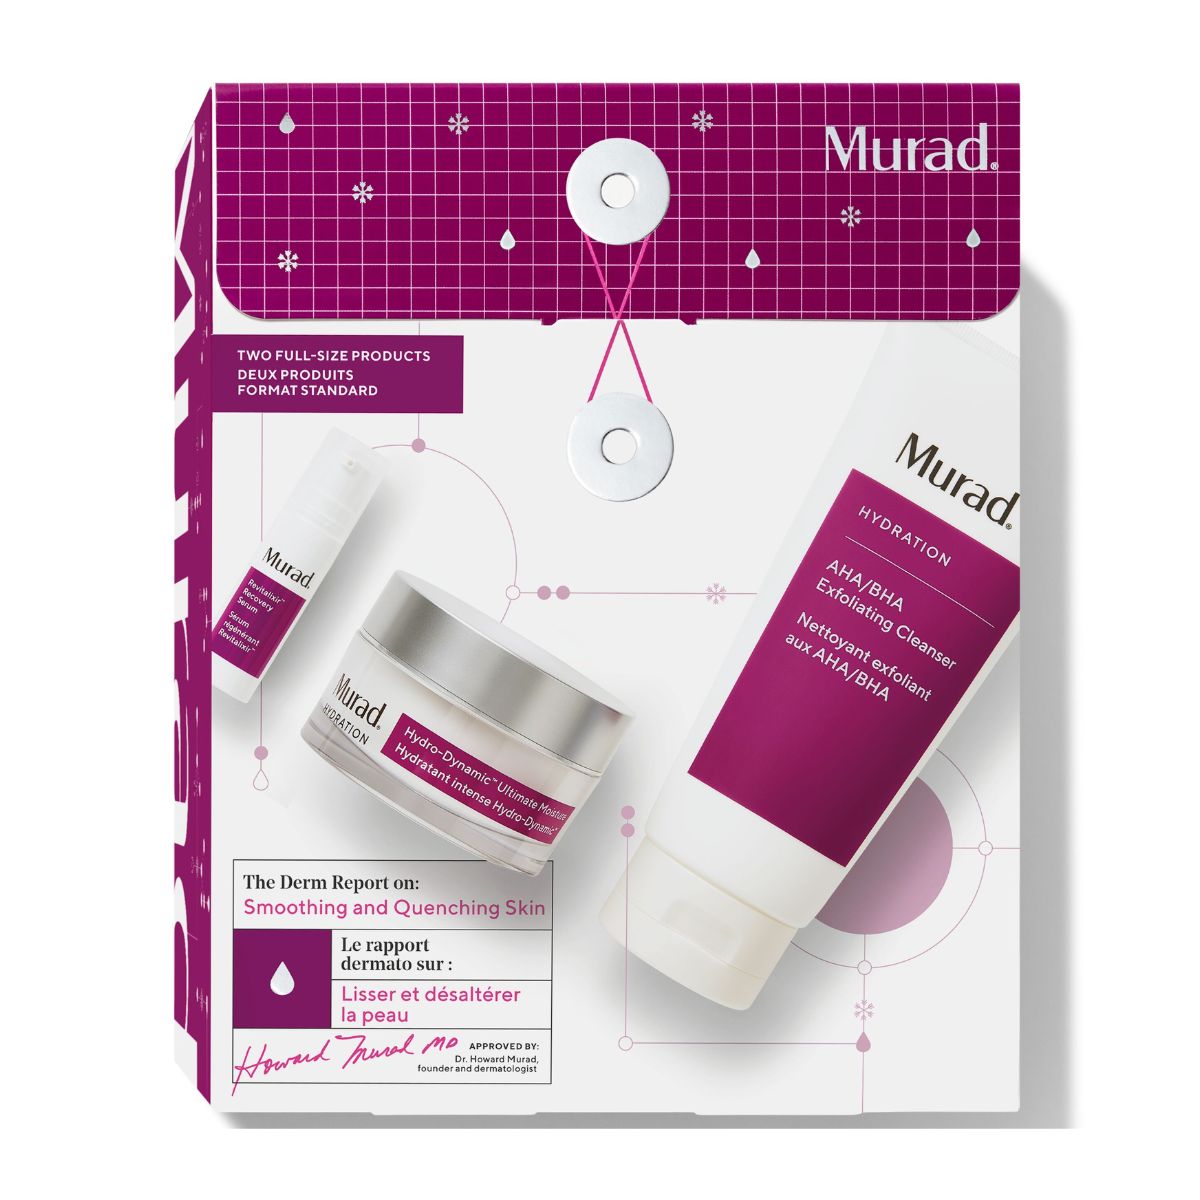 Murad The Derm Report on: Smoothing and Quenching Skin. 20% off